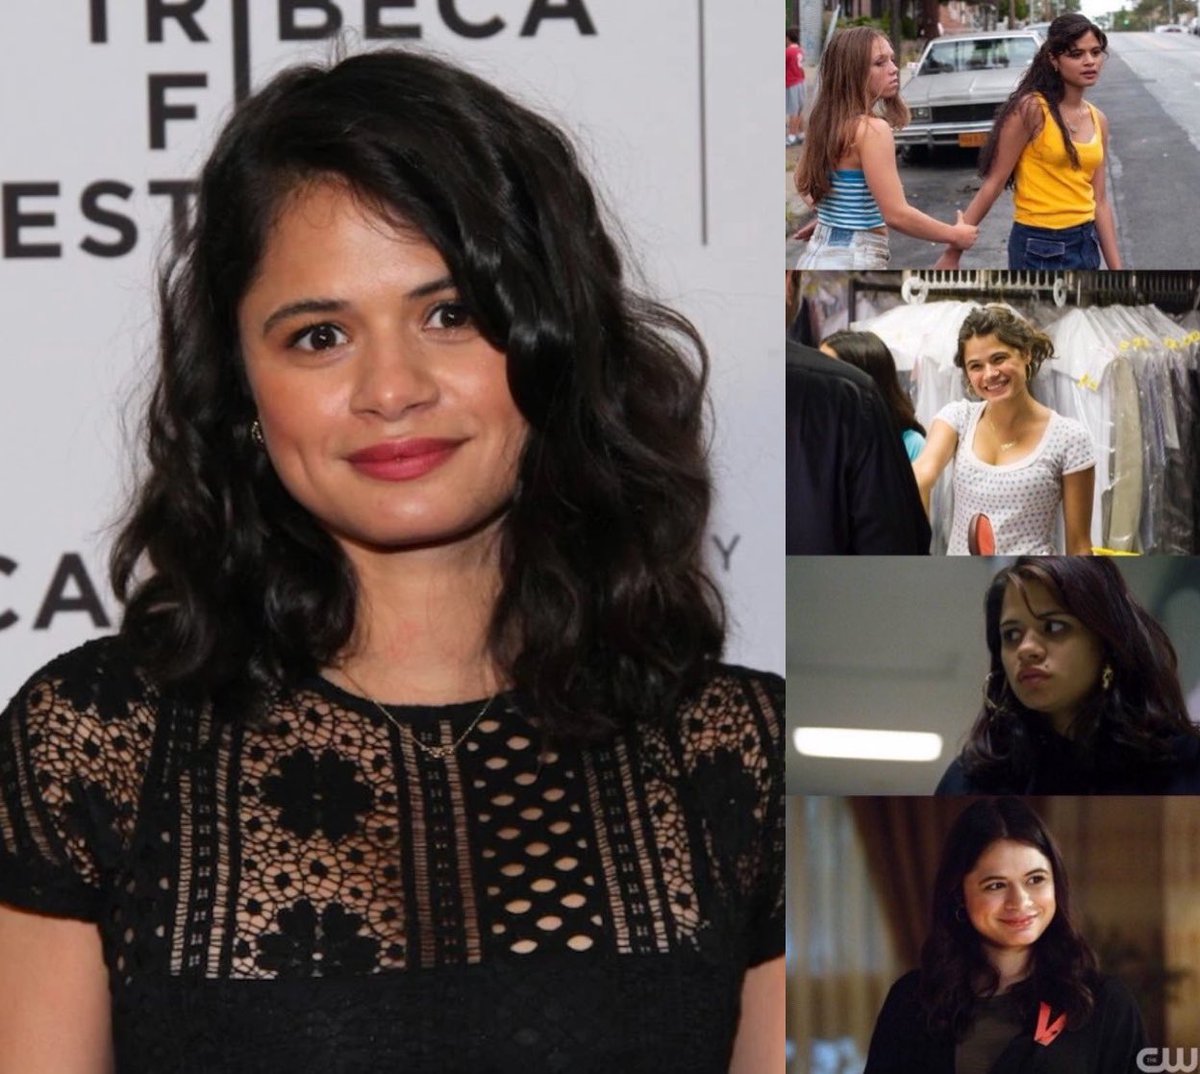 Happy 40th birthday to Melonie Diaz! The actress who played Young Laurie in A Guide to Recognizing Your Saints, Alma in Be Kind Rewind, Sophina in Fruitvale Station and Mel Vera on Charmed. #MelonieDiaz